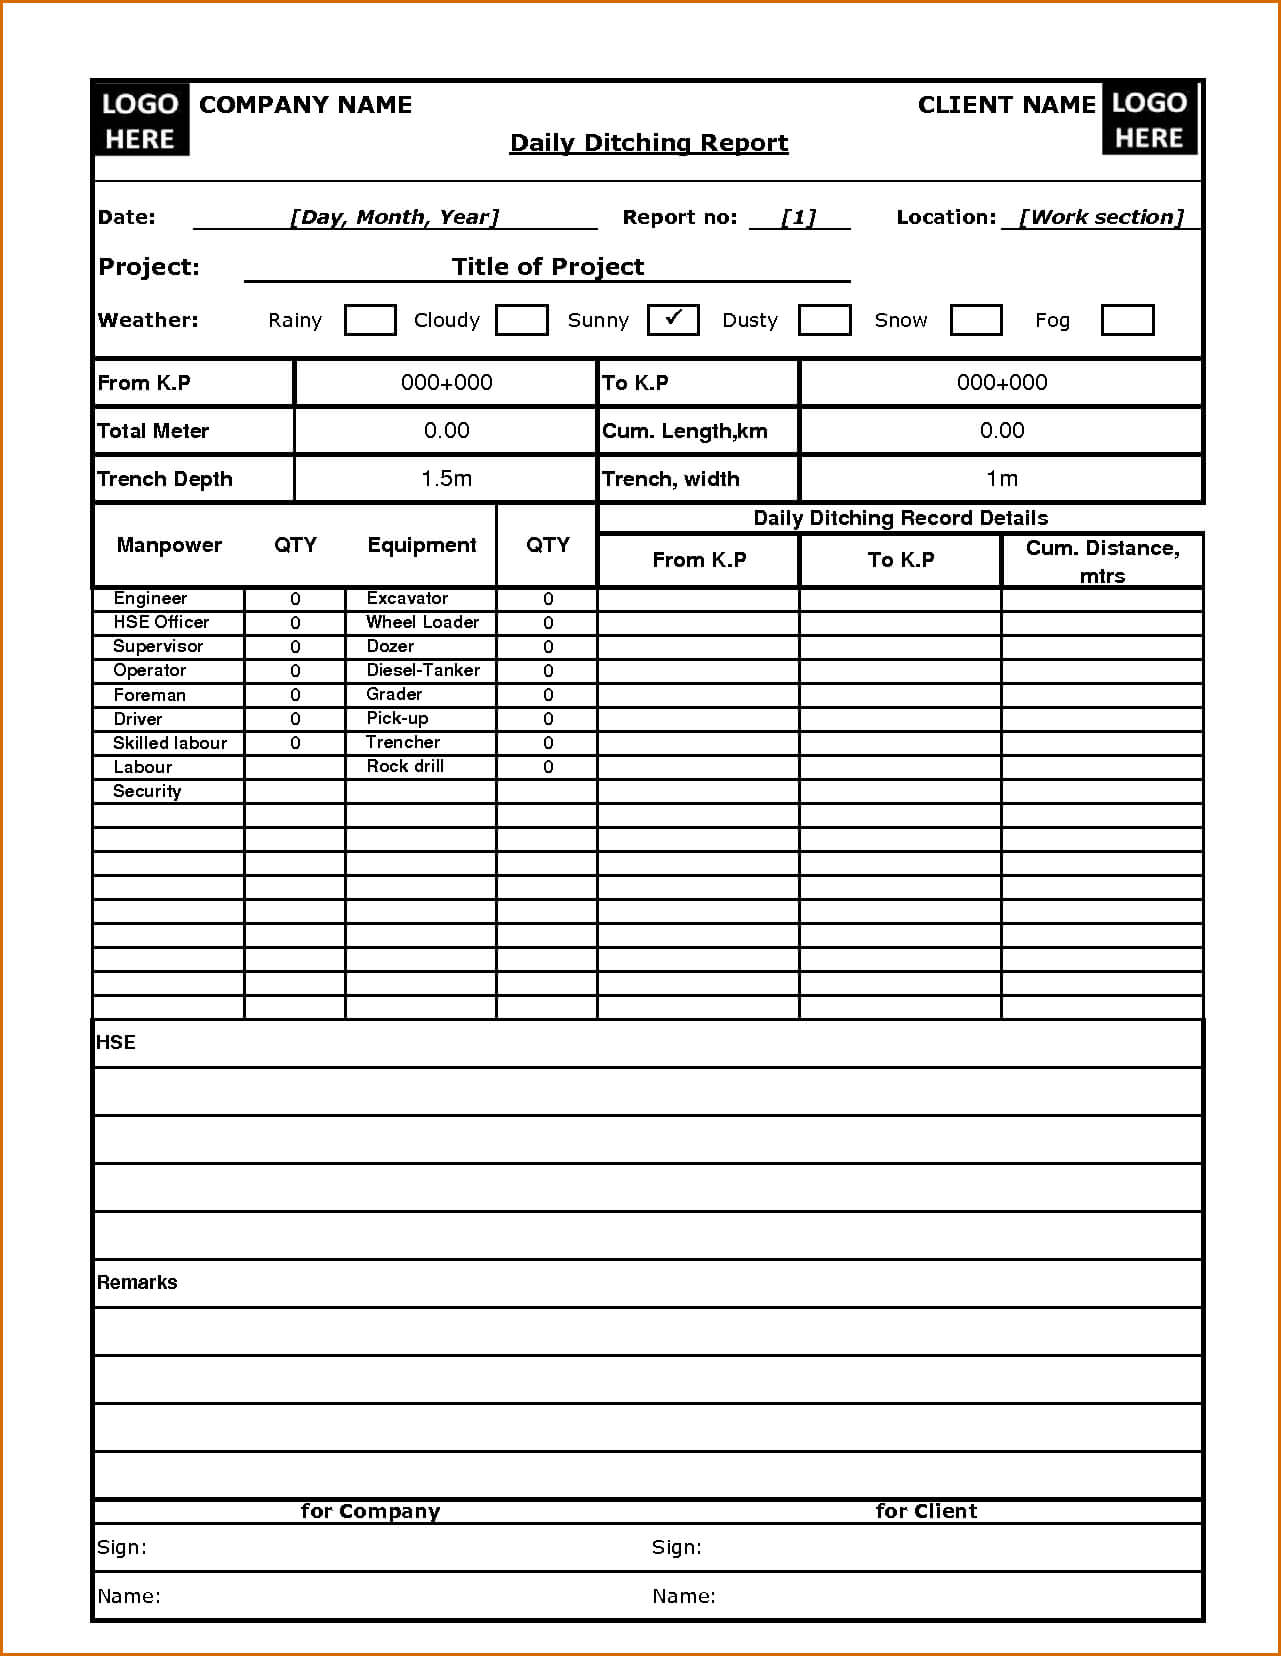 003 Construction Daily Report Template Excel Imposing Ideas Pertaining To Free Construction Daily Report Template